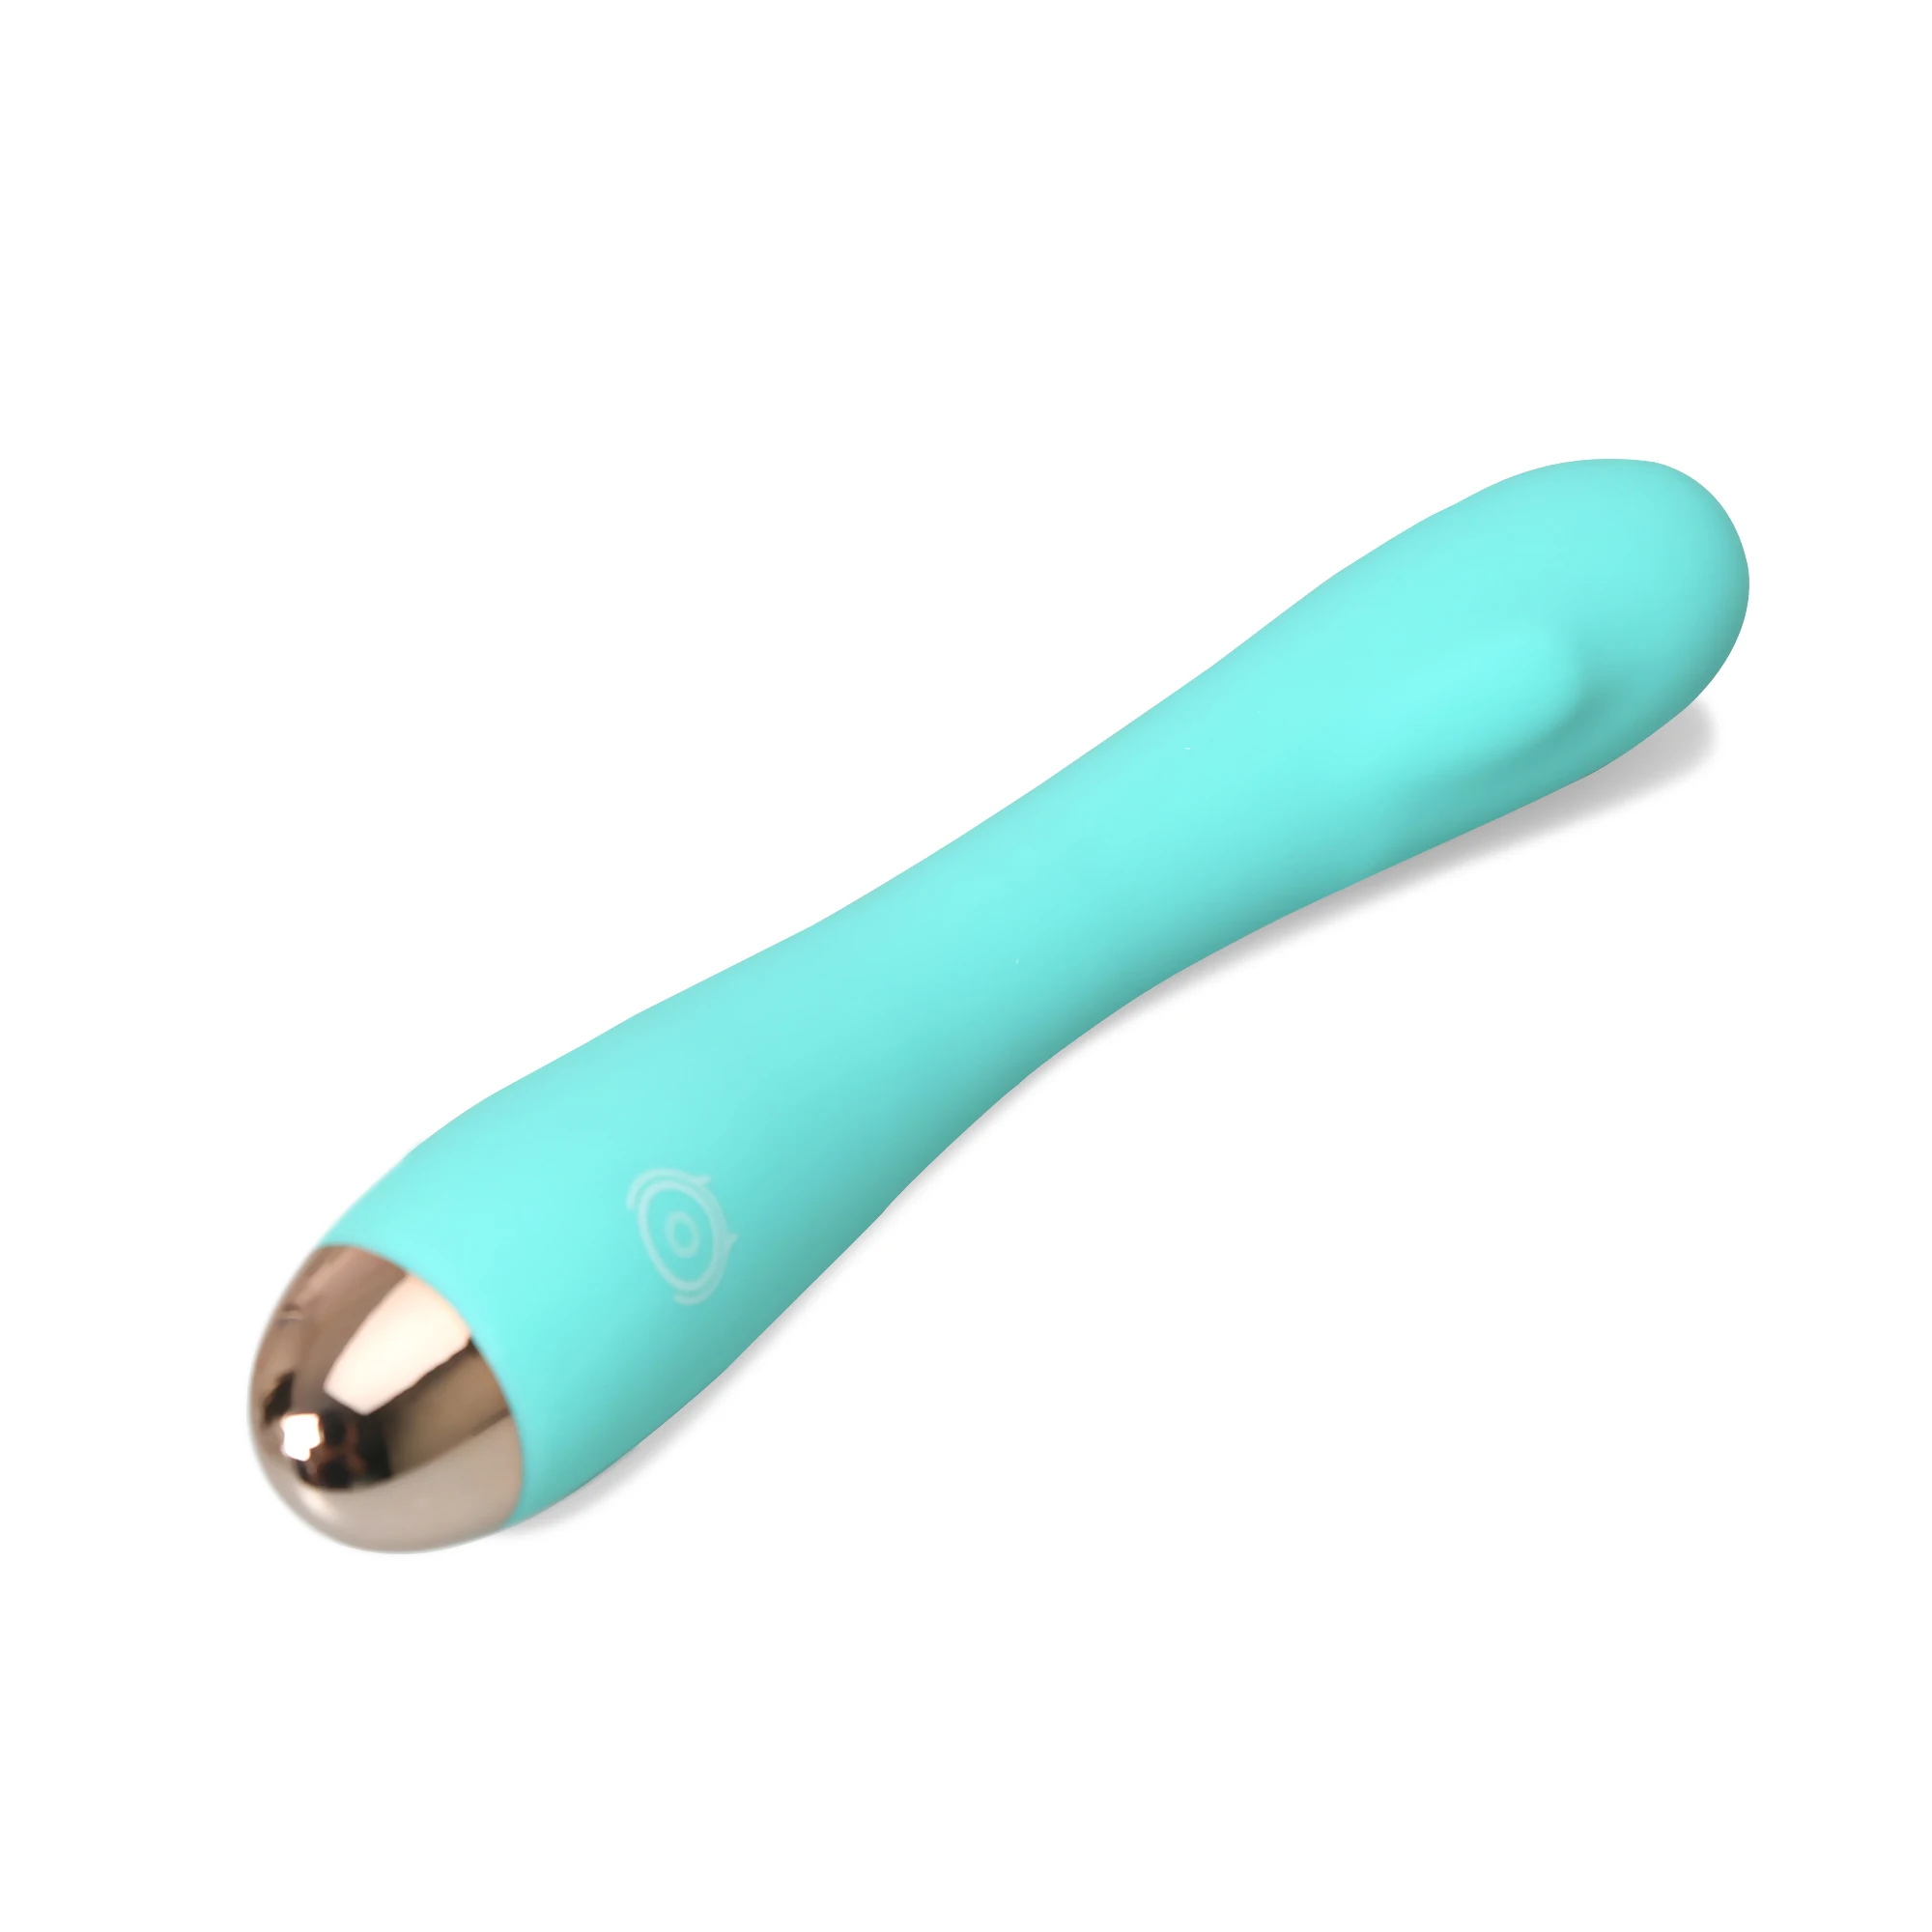 Check Out Inme', A Diy Sex Toy